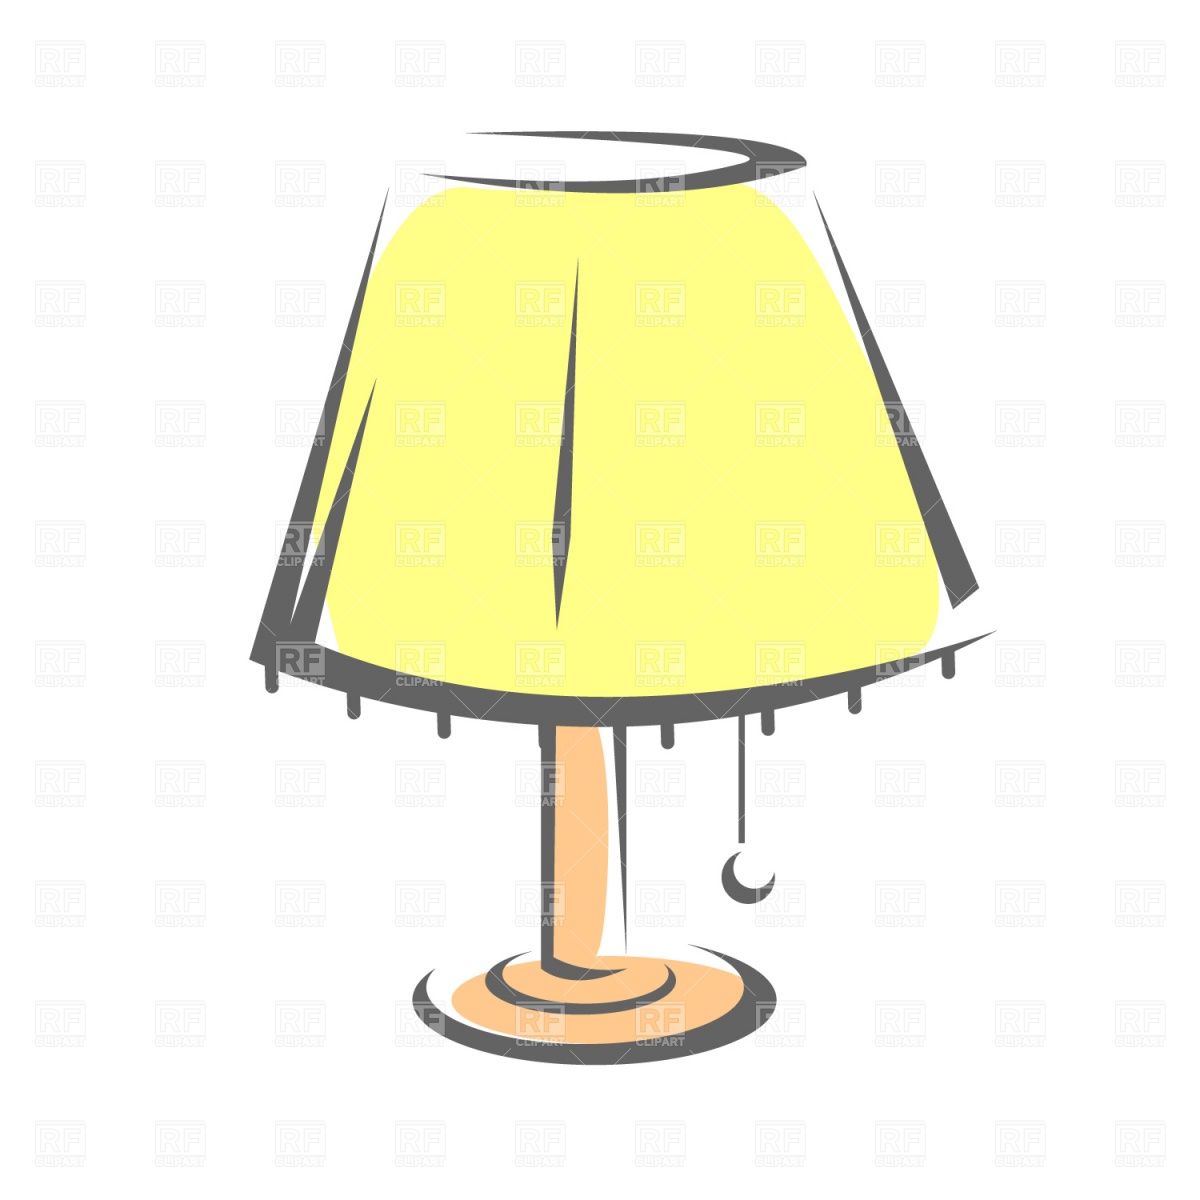 Lamp With Shade 1124 Objects Download Royalty Free Vector Clipart